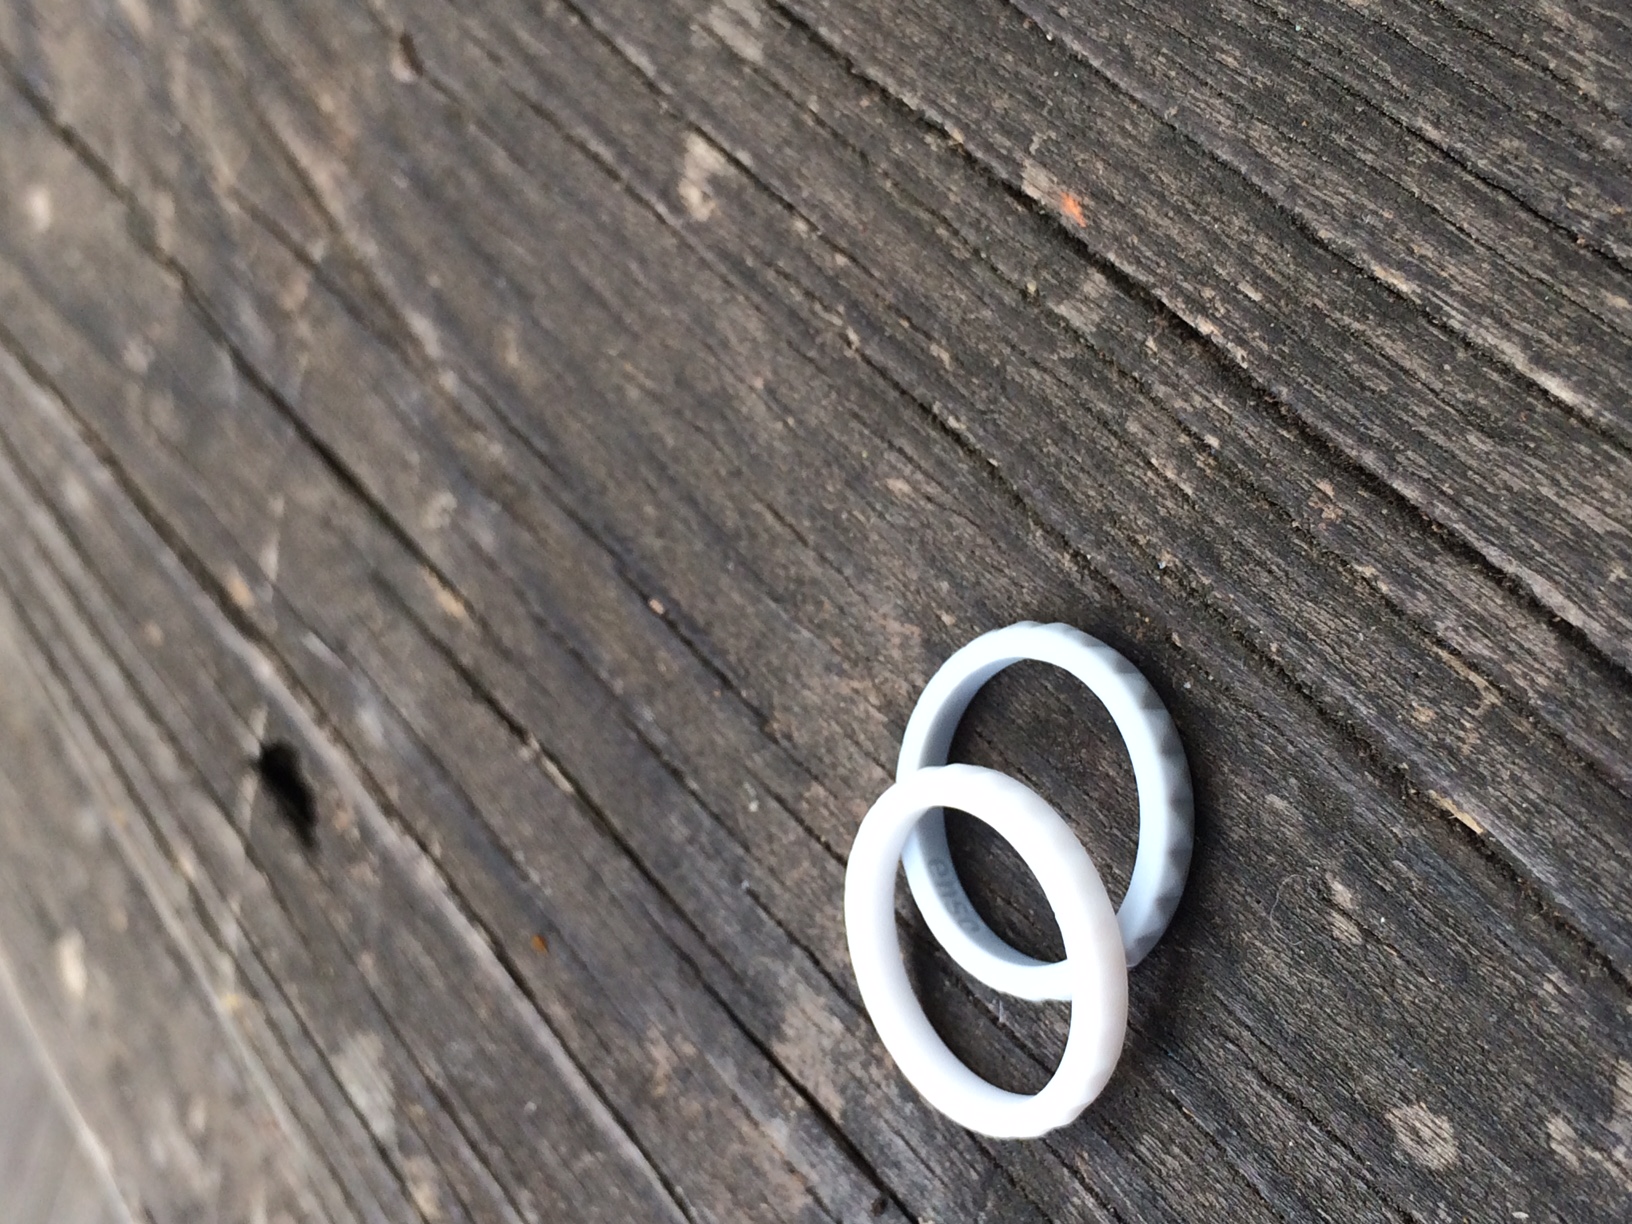 enso rings review